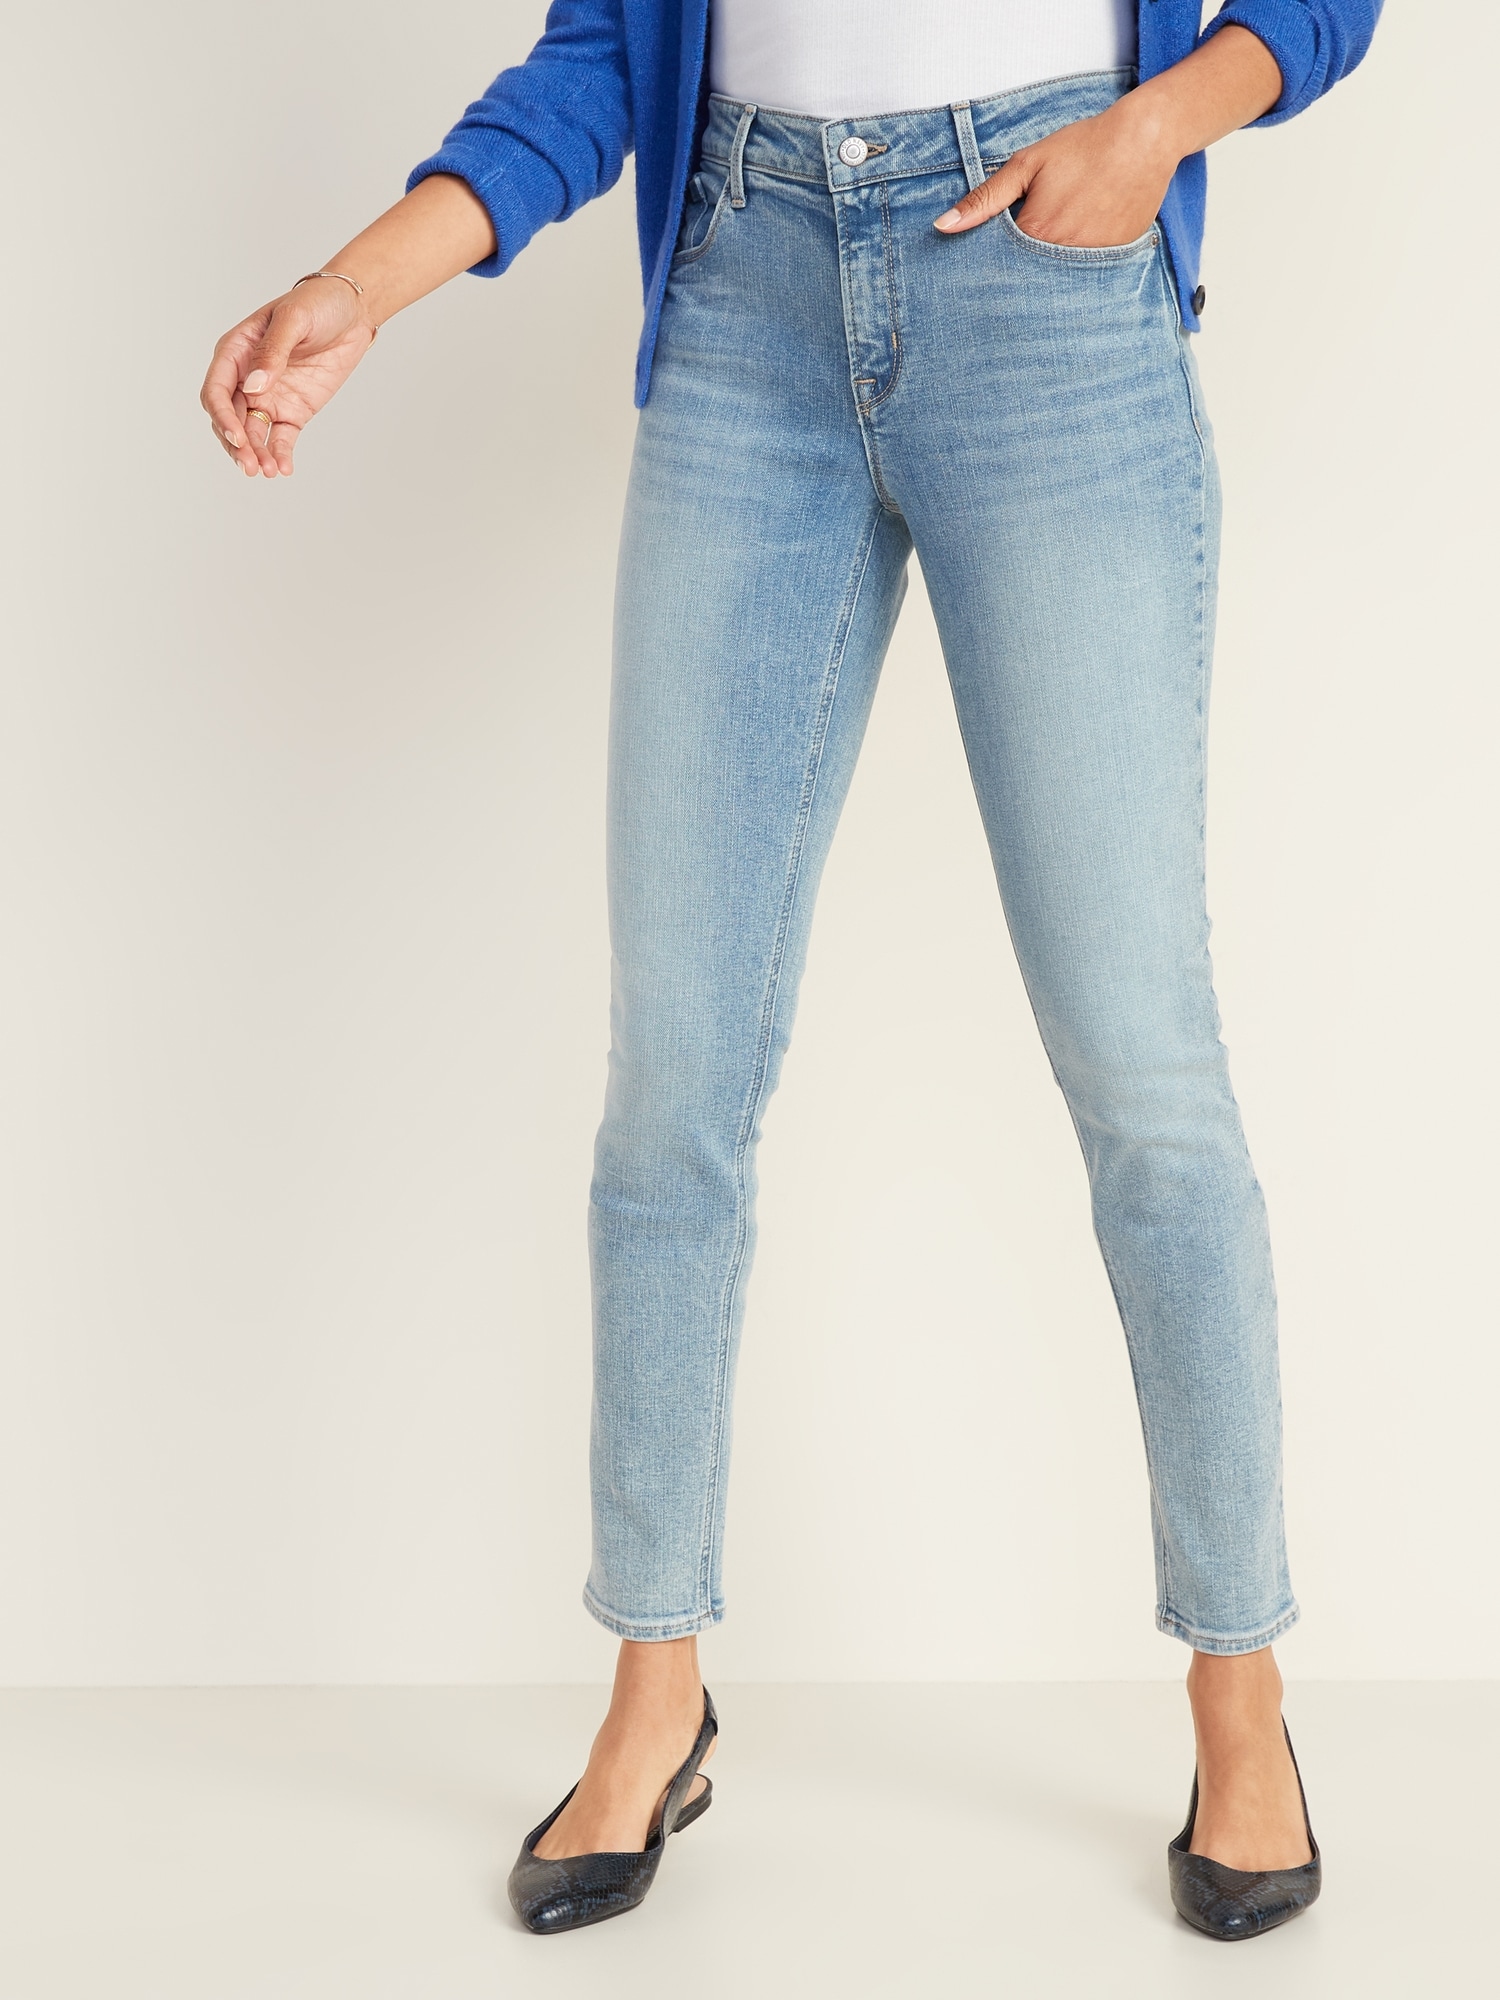 old navy tall skinny jeans